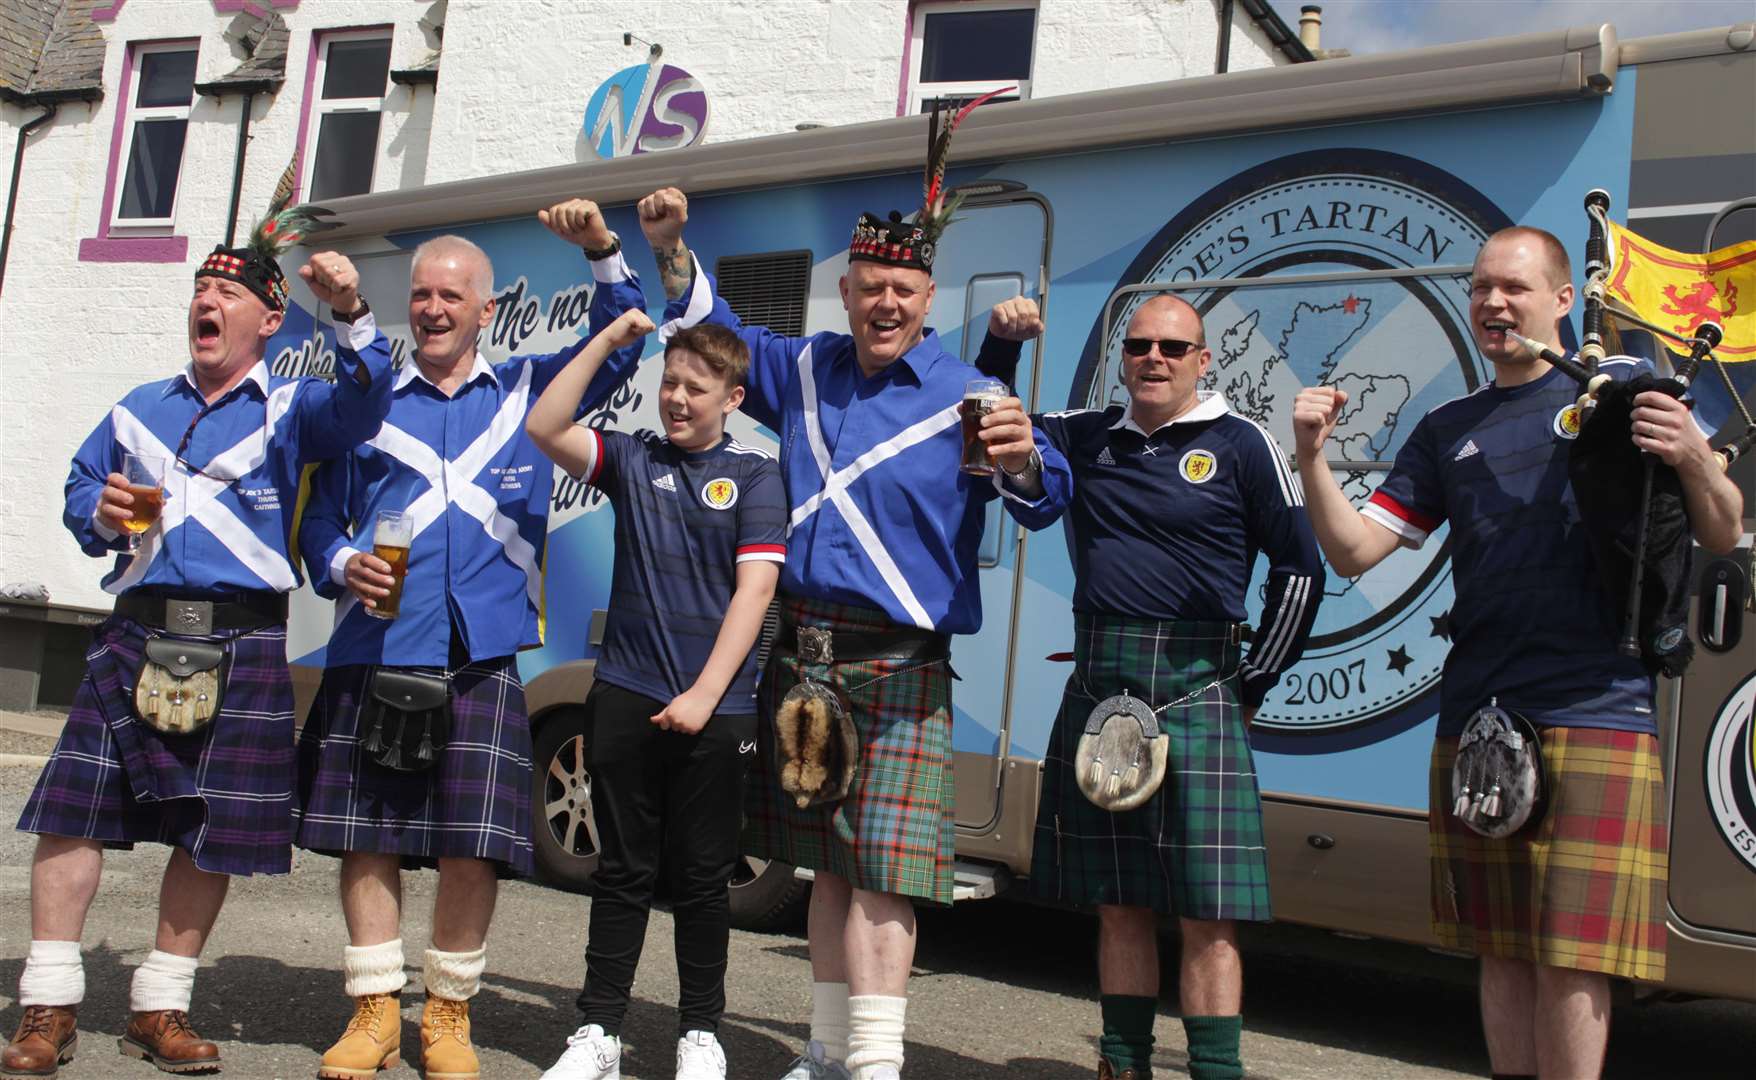 Members of Top Joe's Tartan Army before setting off from the Northern Sands Hotel on Sunday morning. Martin Nicolson's son Logan (12) was among those cheering on the supporters. Picture: Alan Hendry